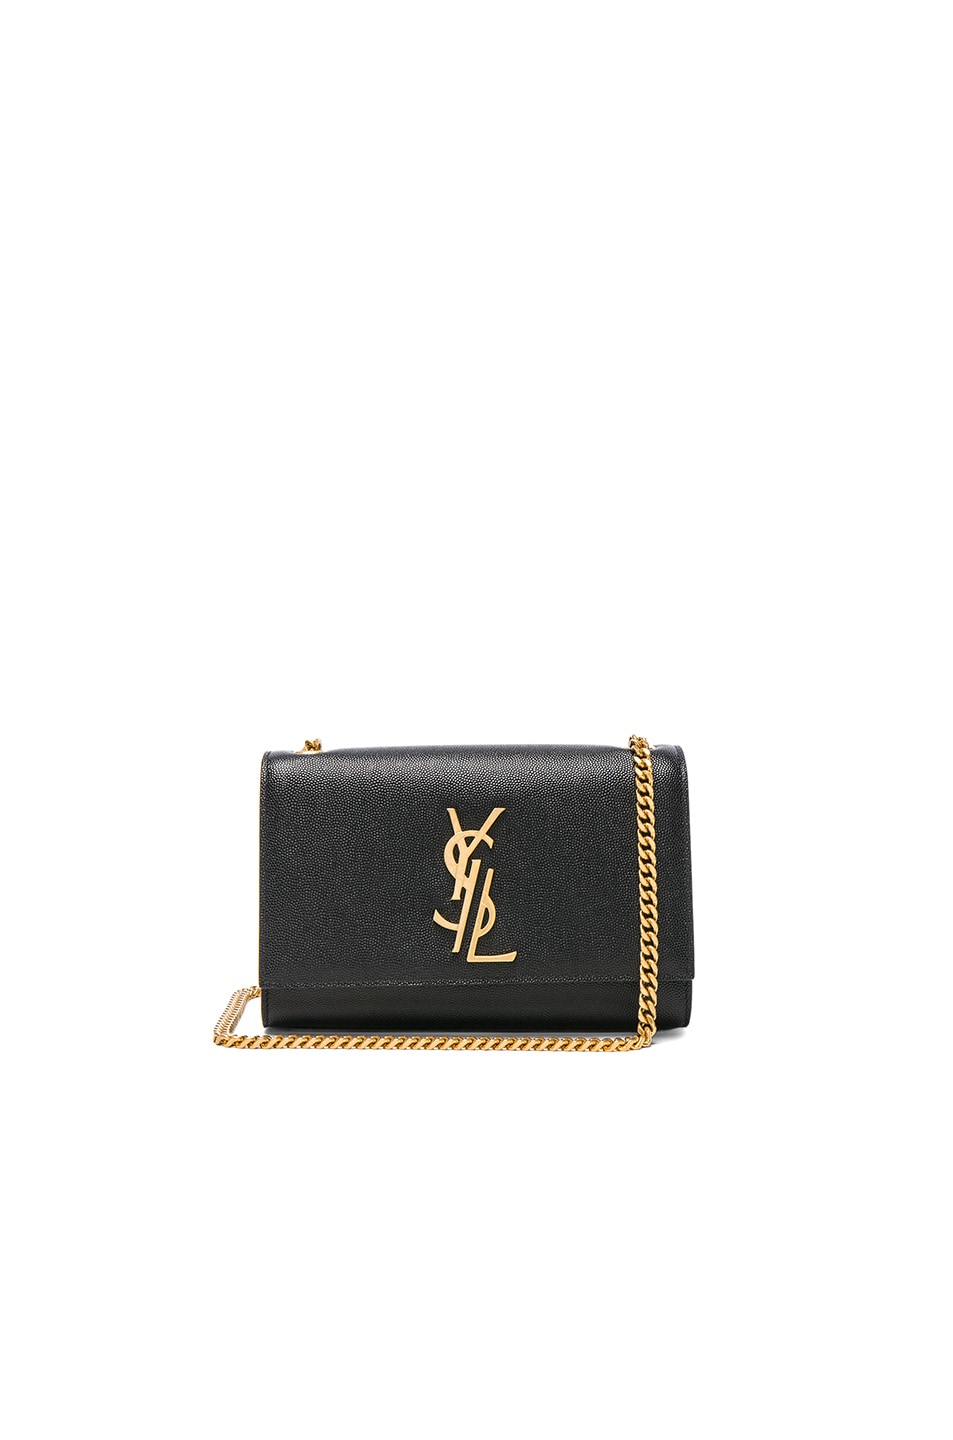 Image 1 of Saint Laurent Small Deconstructed Monogramme Kate Clutch in Black